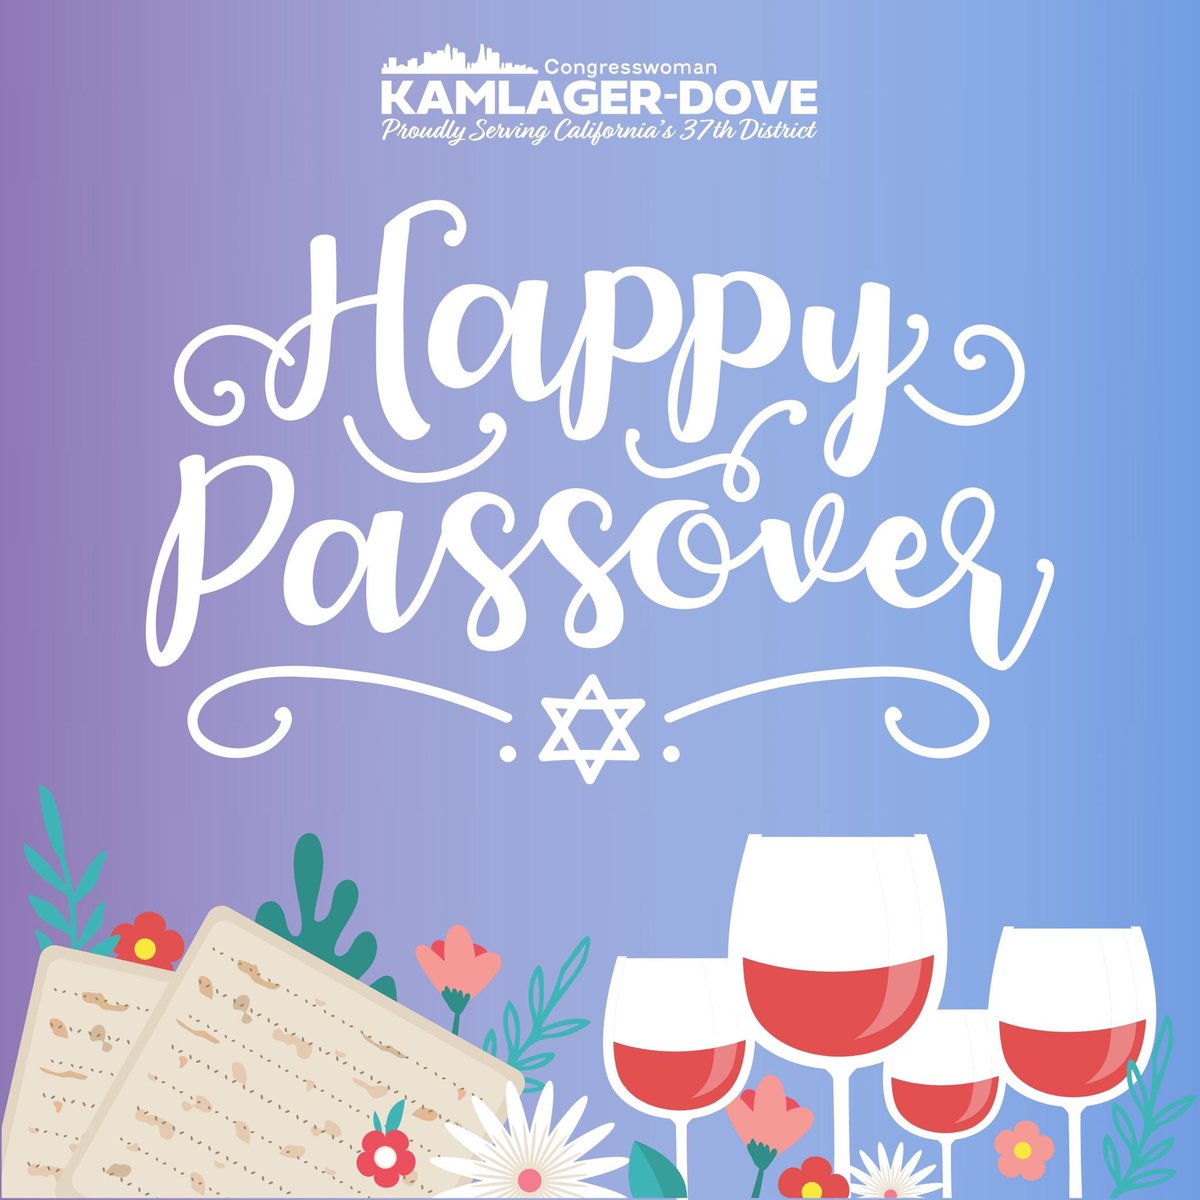 Tonight, Jewish families in #CA37 and around the world will gather around the Seder table to observe the first night of #Passover. I hope this sacred time brings reflection and peace to all who celebrate. Chag Sameach!